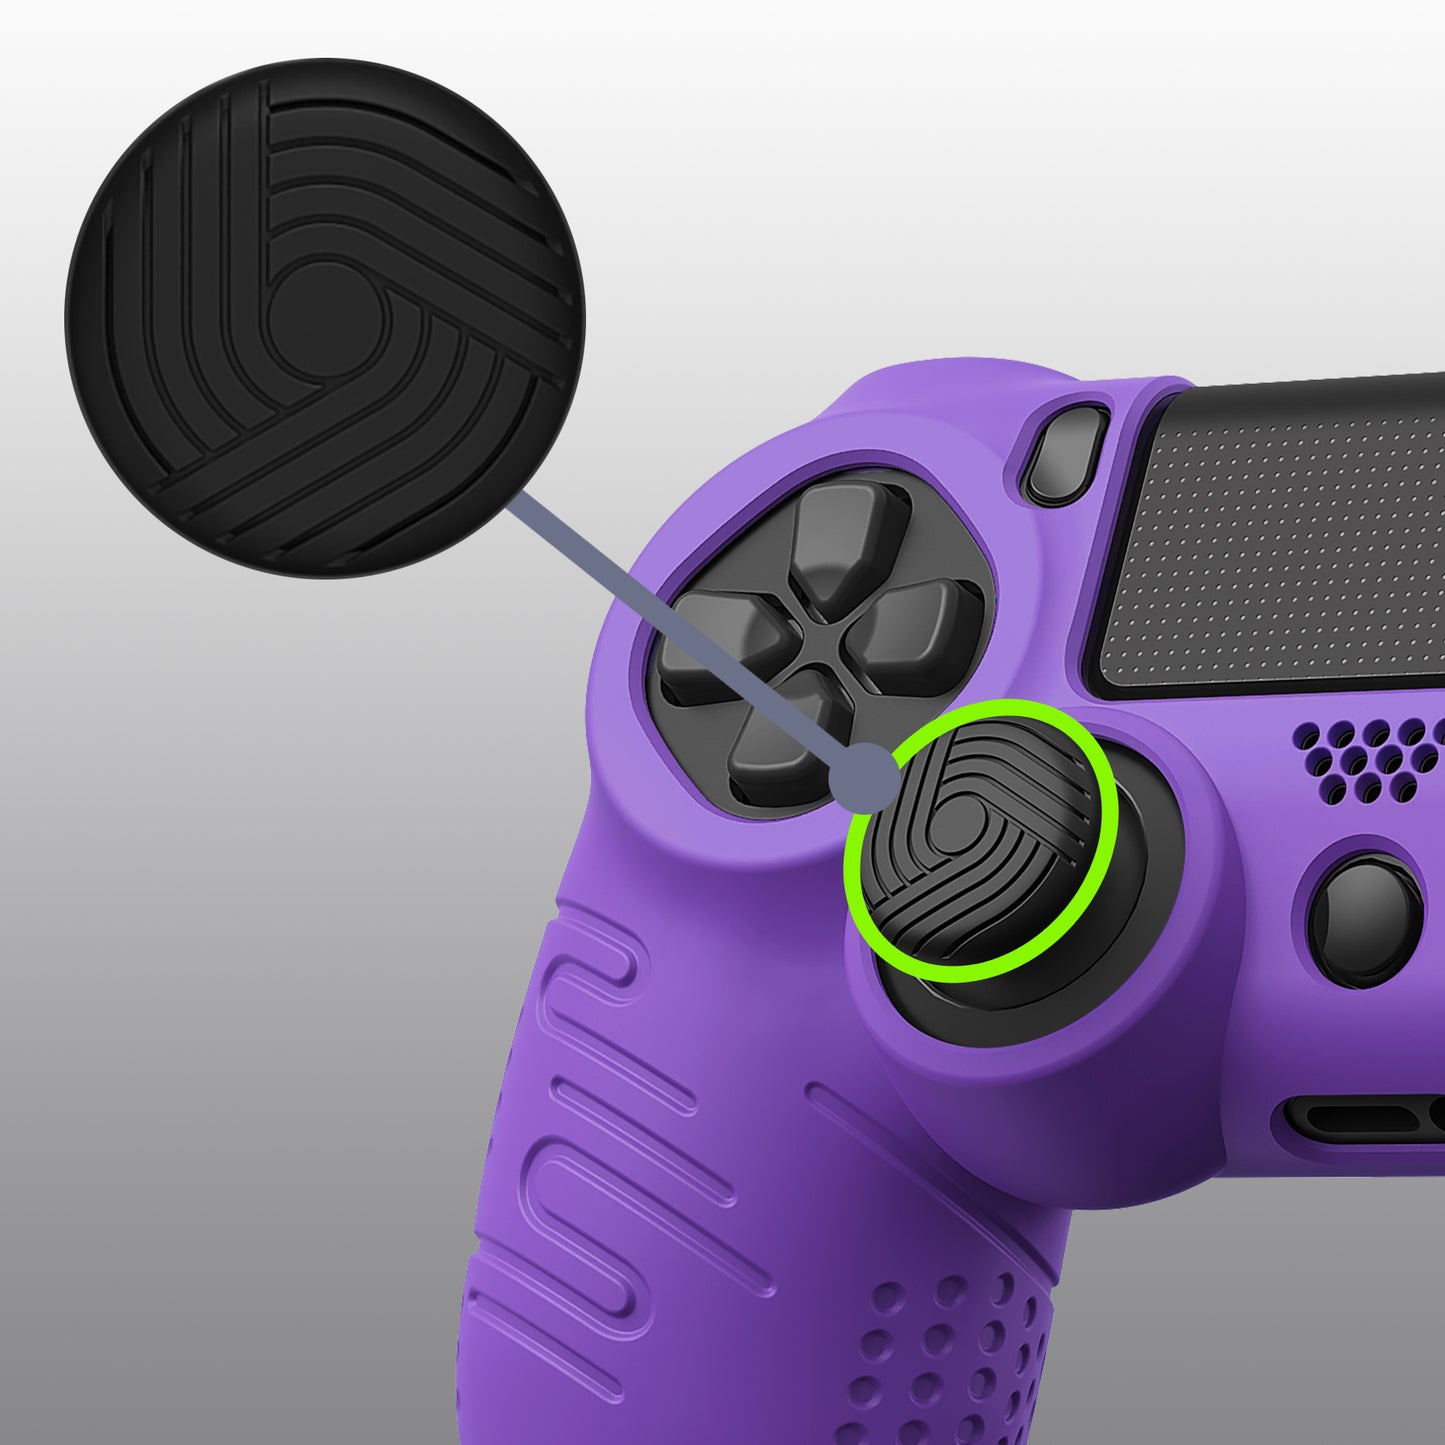 PlayVital Line & Dot Silicone Cover Skin with Thumb Grip Caps for PS4 Slim Pro Controller - Purple - CLRP4P004